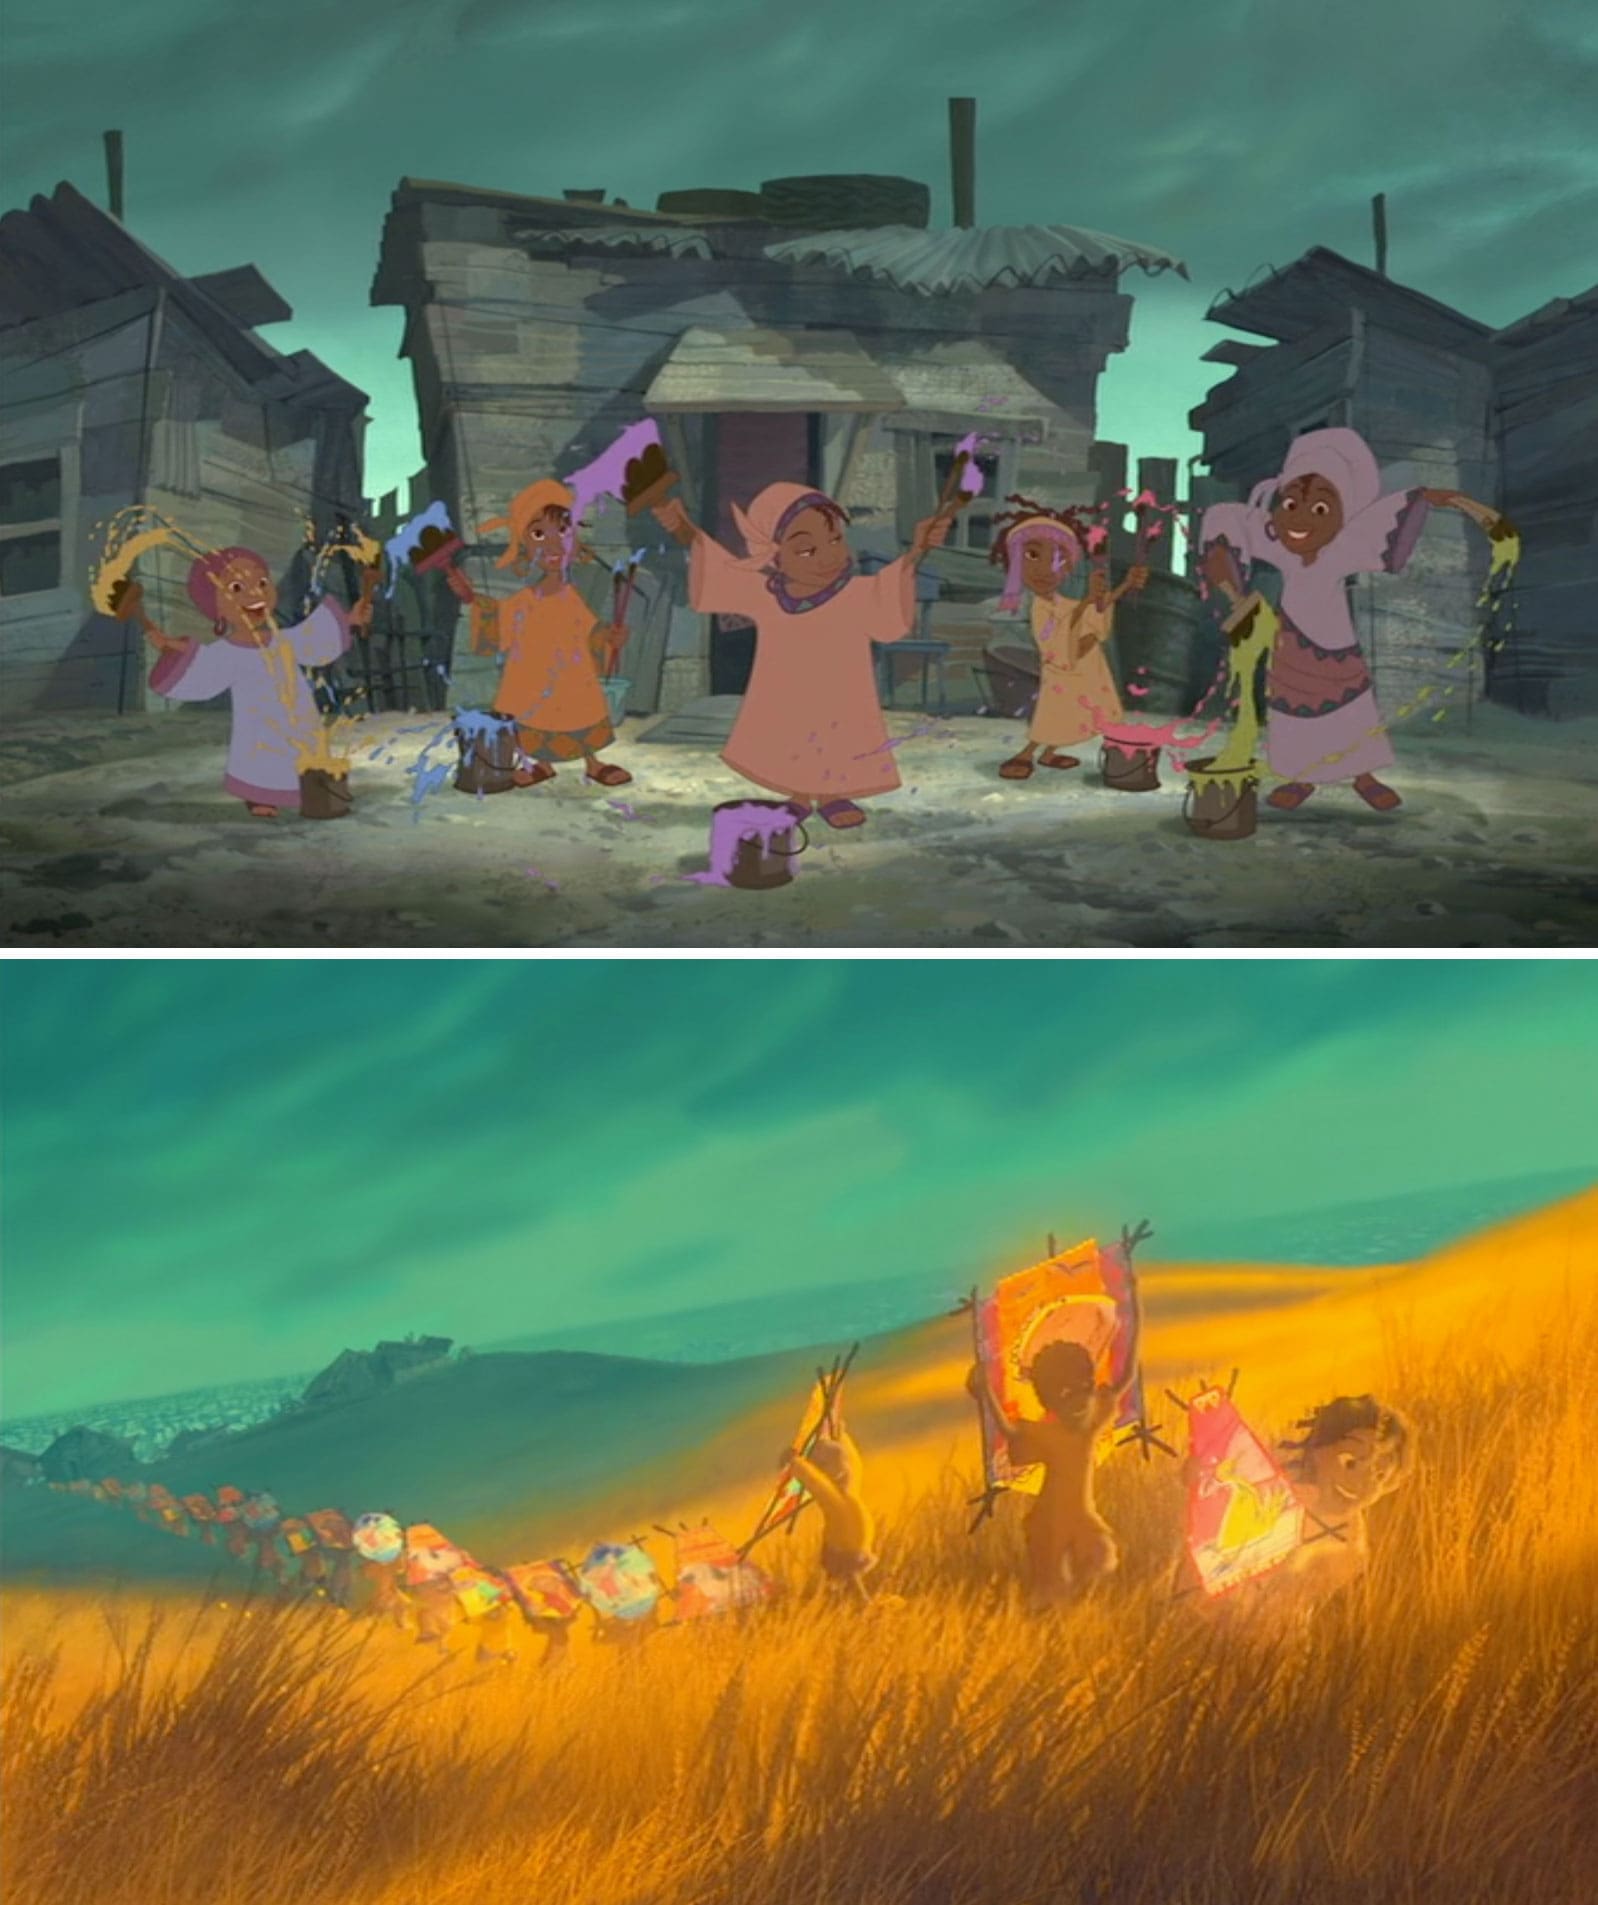 Stills from "One by One," a Disney short released in 2004